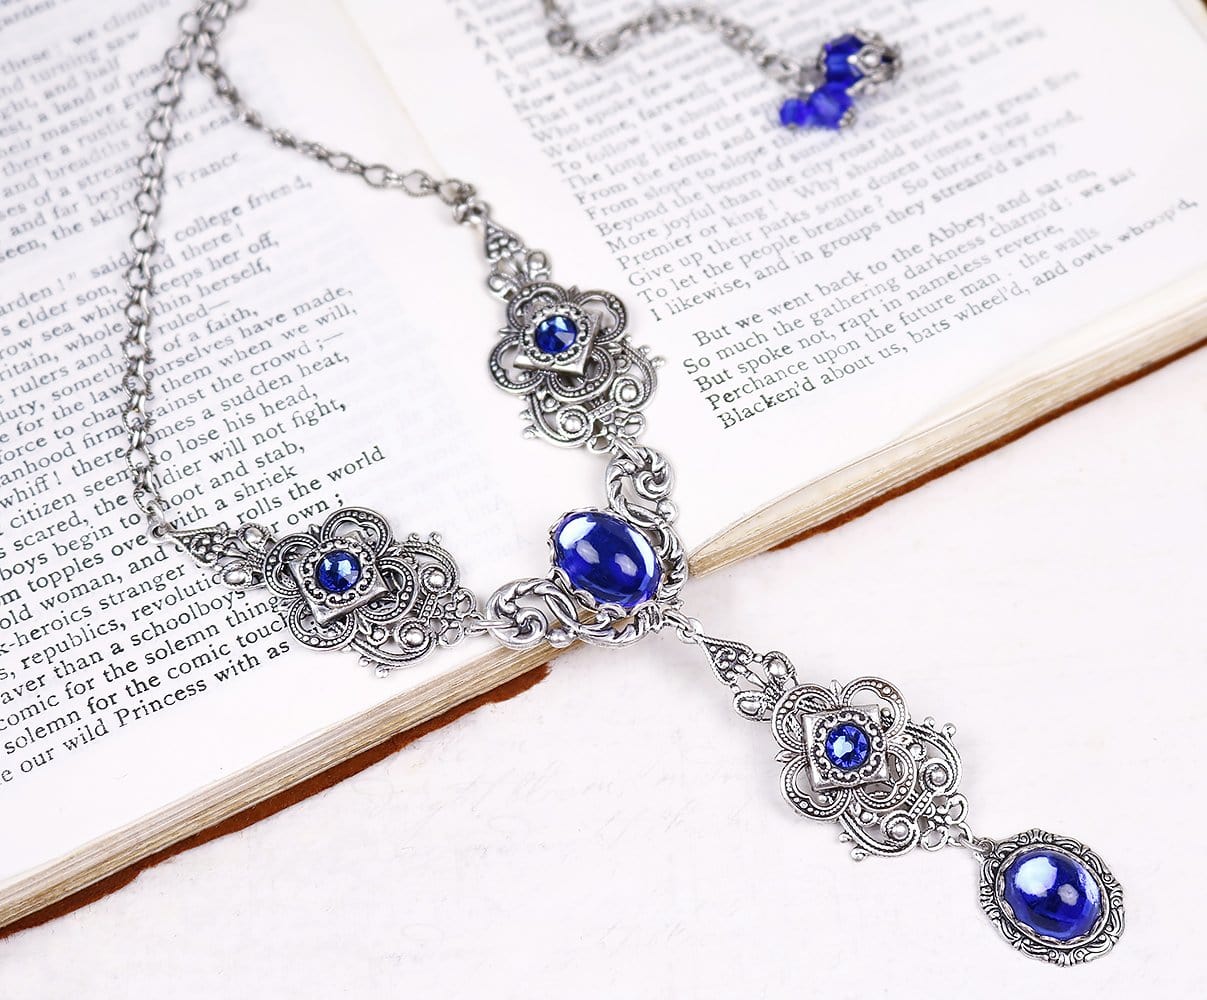 Avalon Ornate Necklace in Sapphire and Antiqued Silver by Rabbitwood and Reason